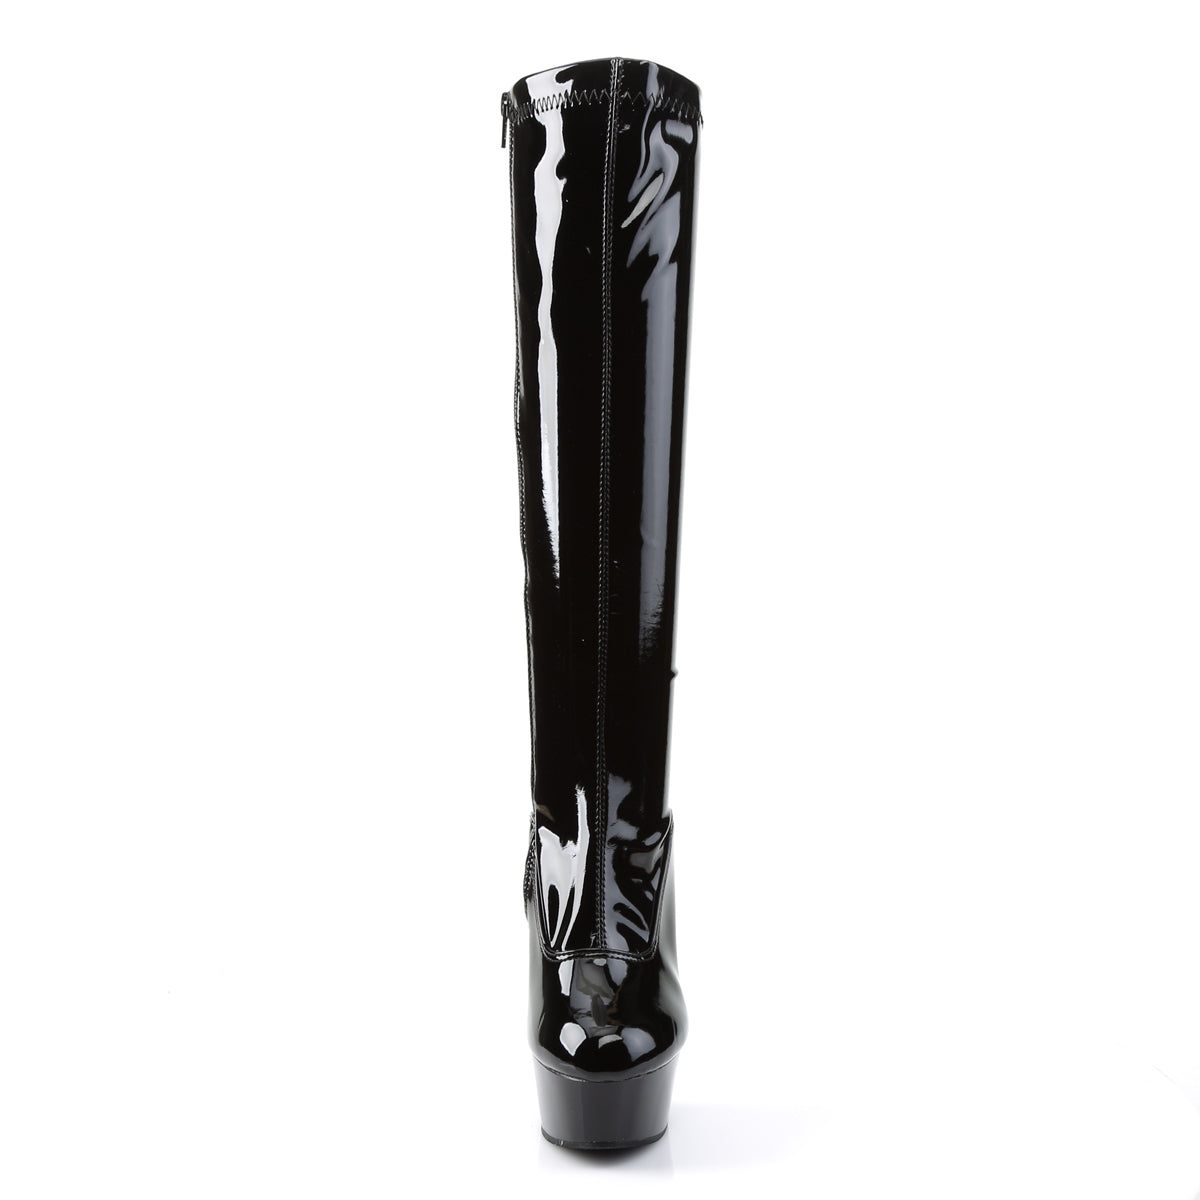 DELIGHT-2000 6" Heel Black Stretch Patent Pole Dancer Boots-Pleaser- Sexy Shoes Alternative Footwear